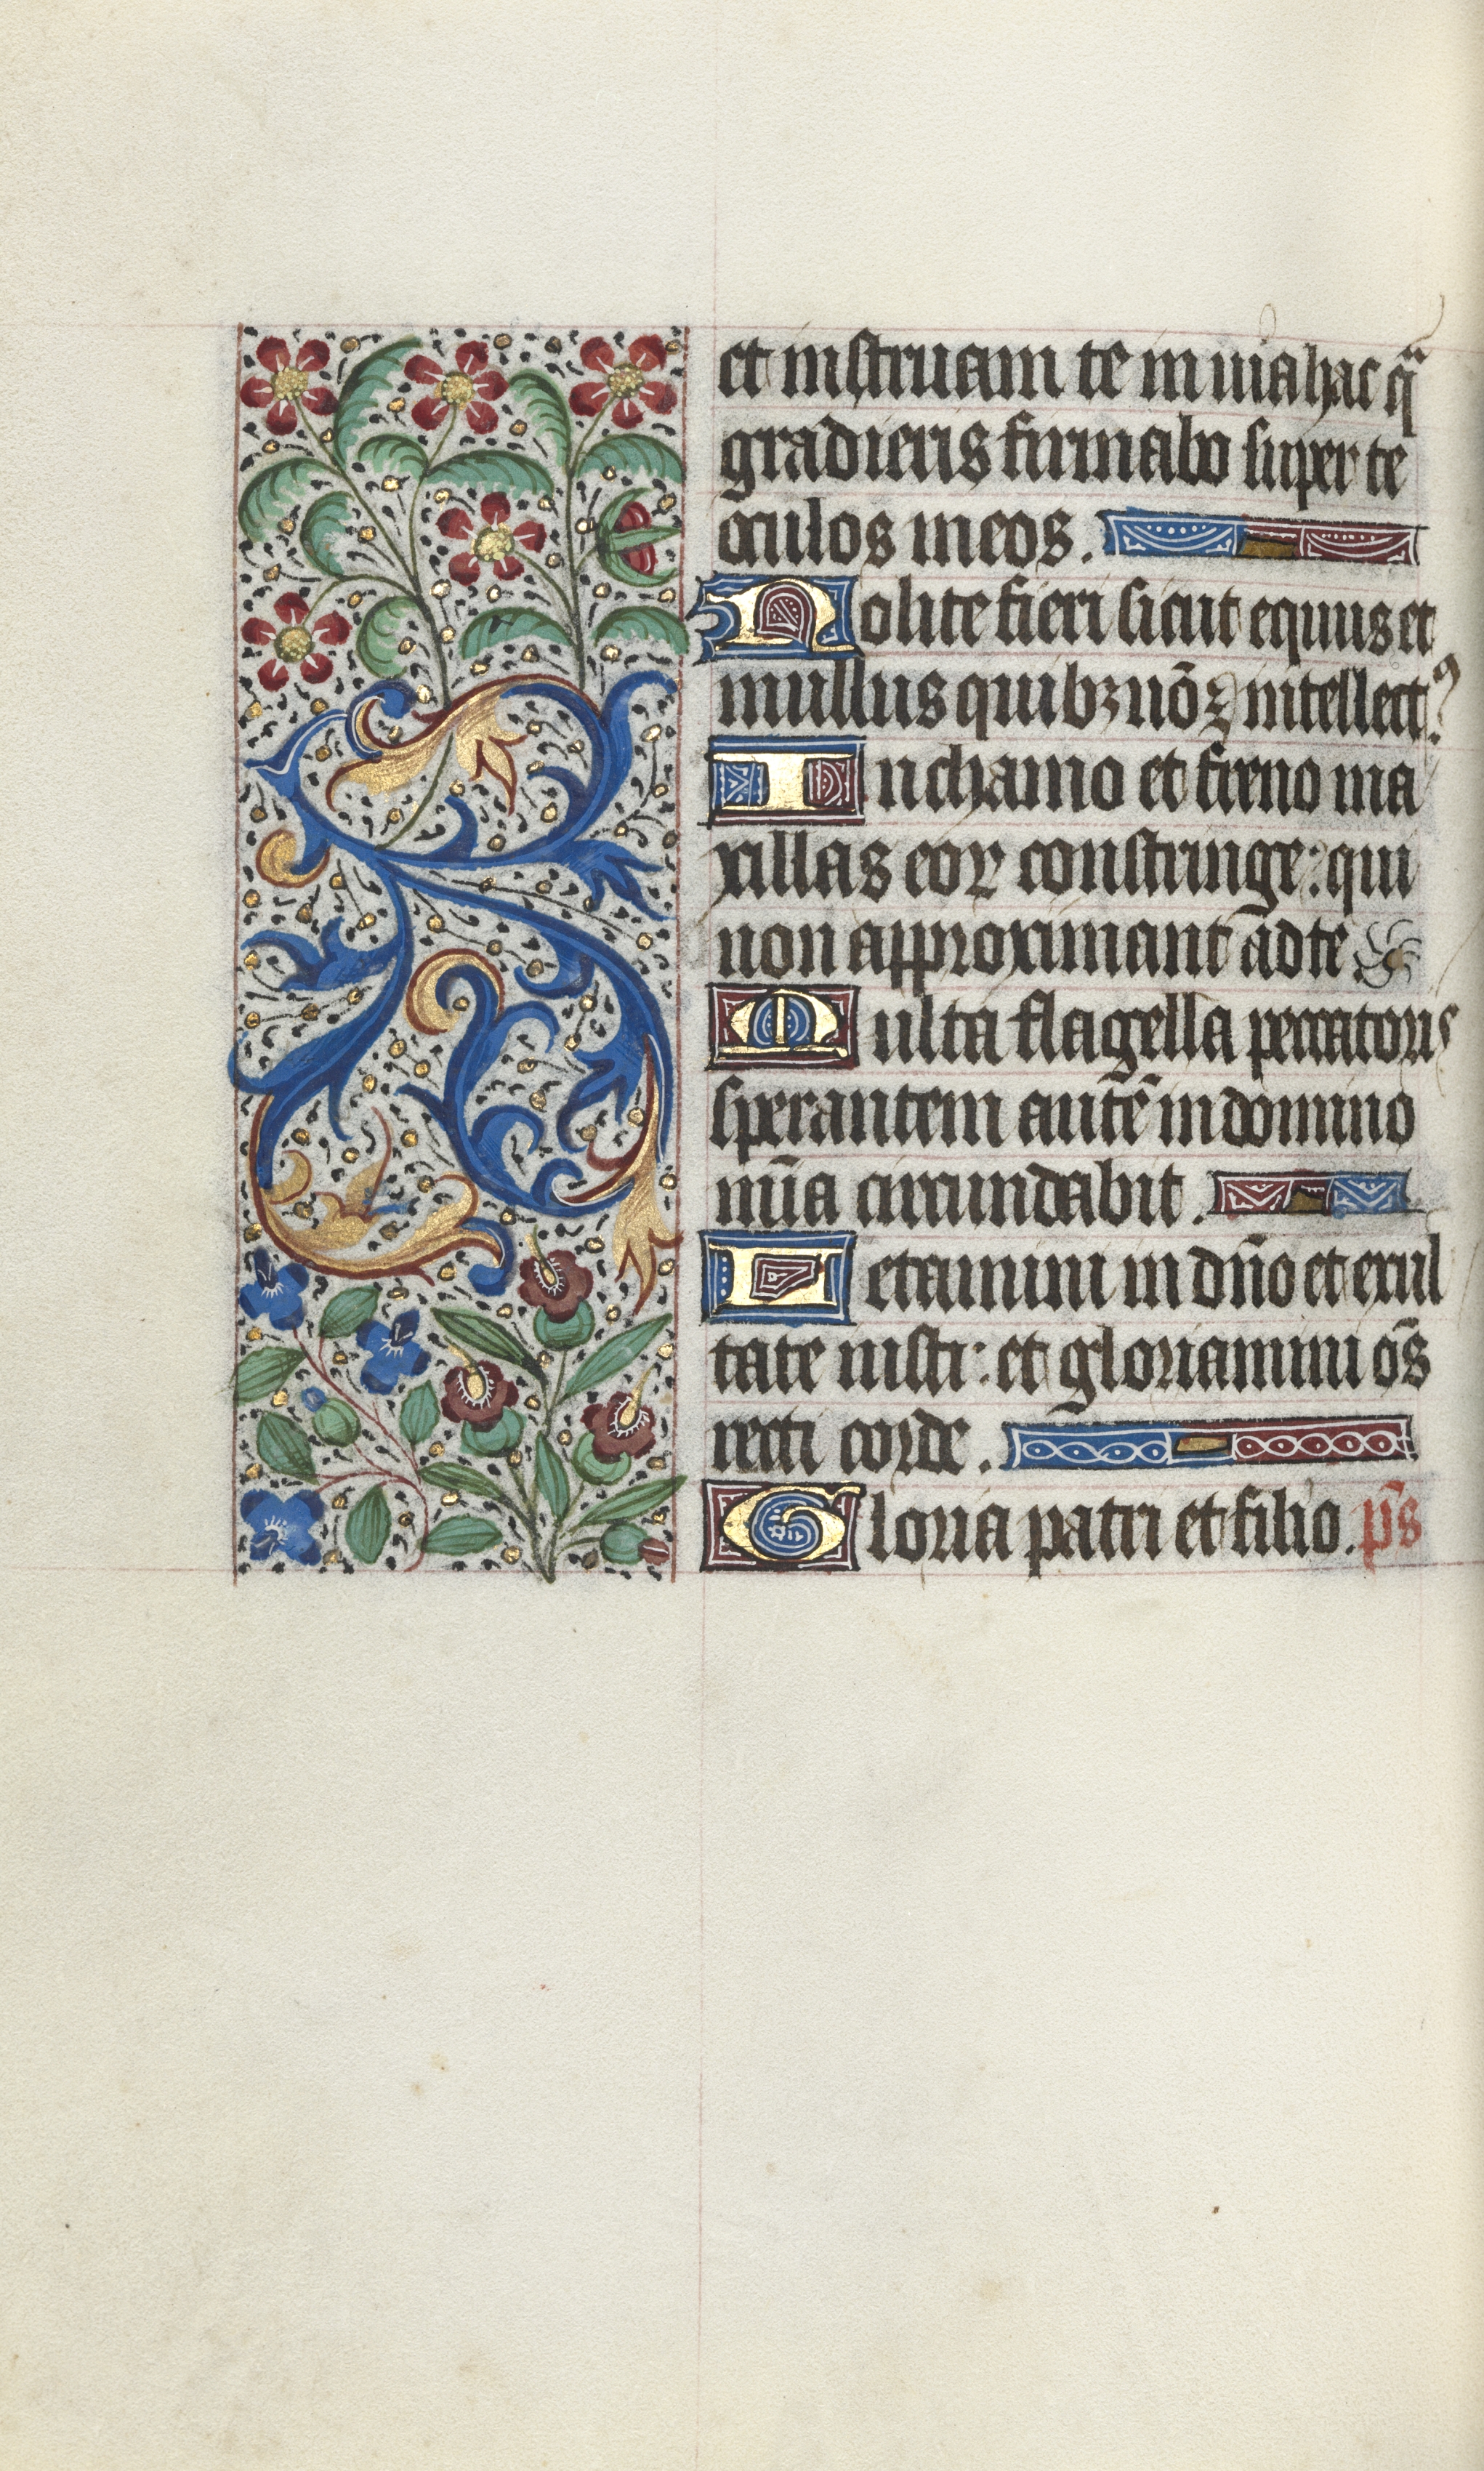 Book of Hours (Use of Rouen): fol. 82v